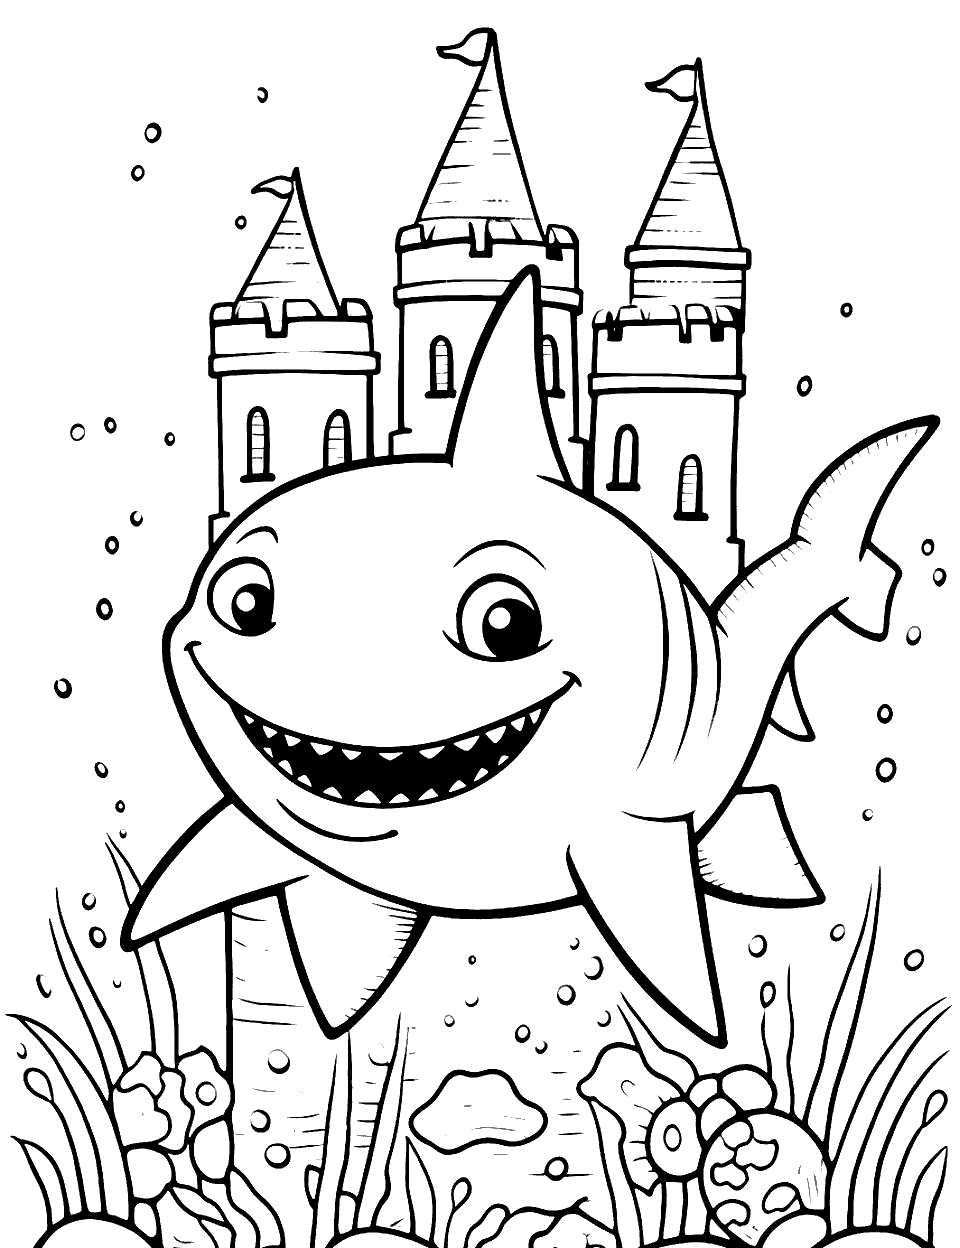 Baby Shark's Coral Castle Shark Coloring Page - Baby Shark playing in a coral castle.